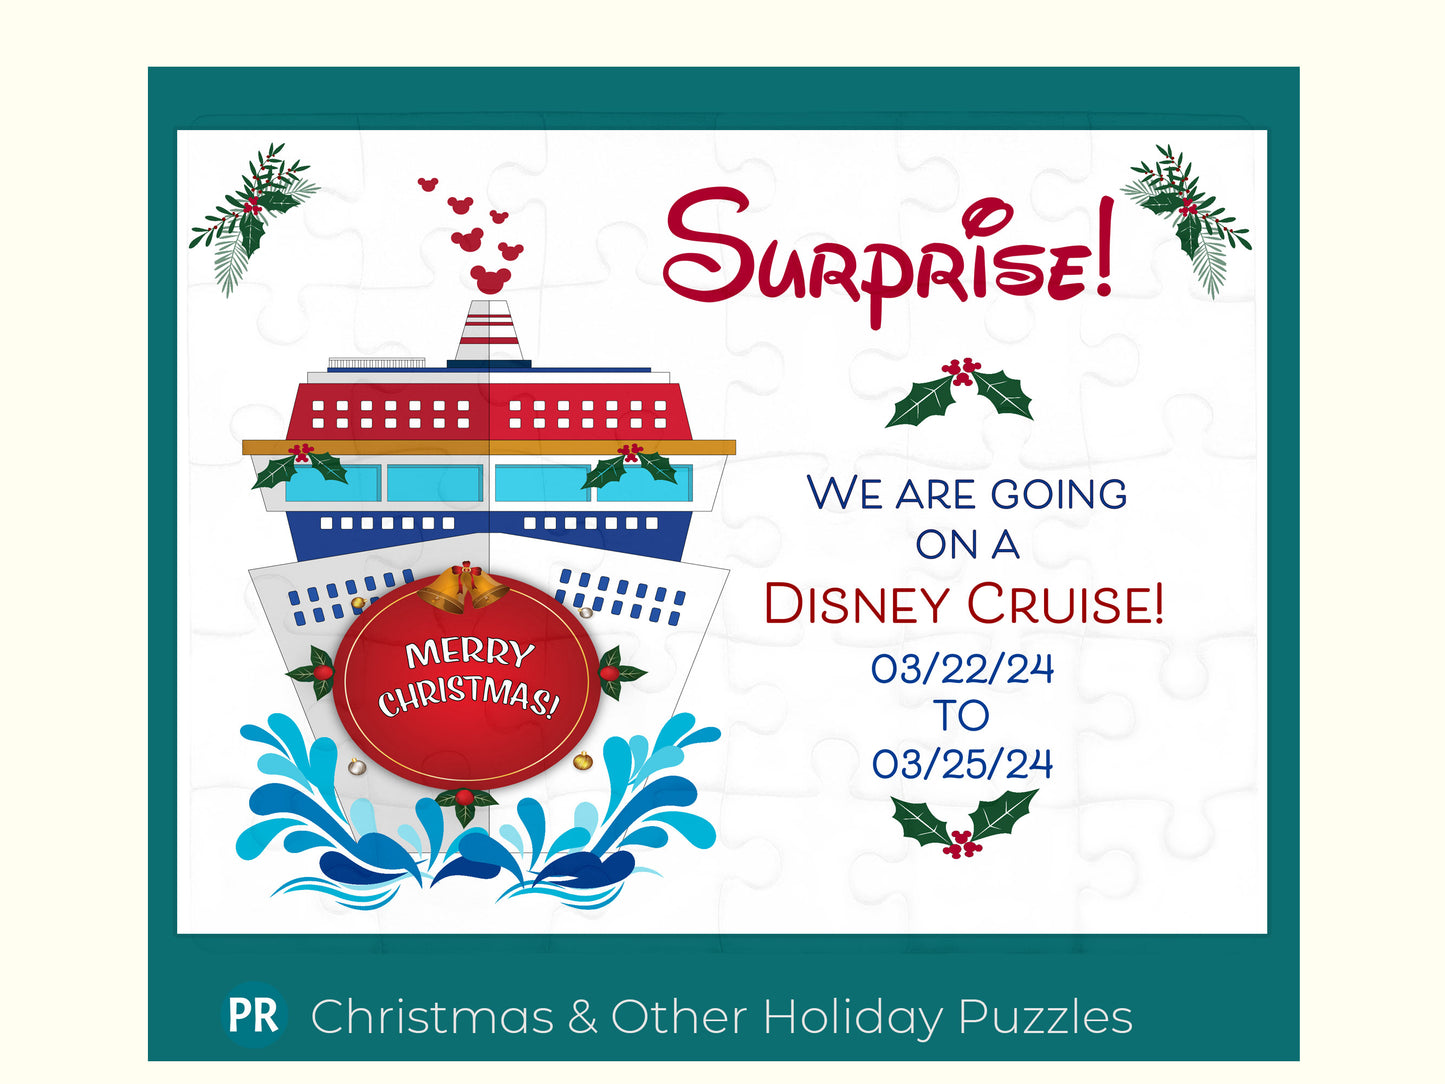 Christmas Holiday Disney Family Cruise Trip Reveal Puzzle with Custom Message! Sailing on the Wish, Dream, Wonder, Fantasy, Treasure, or Magic